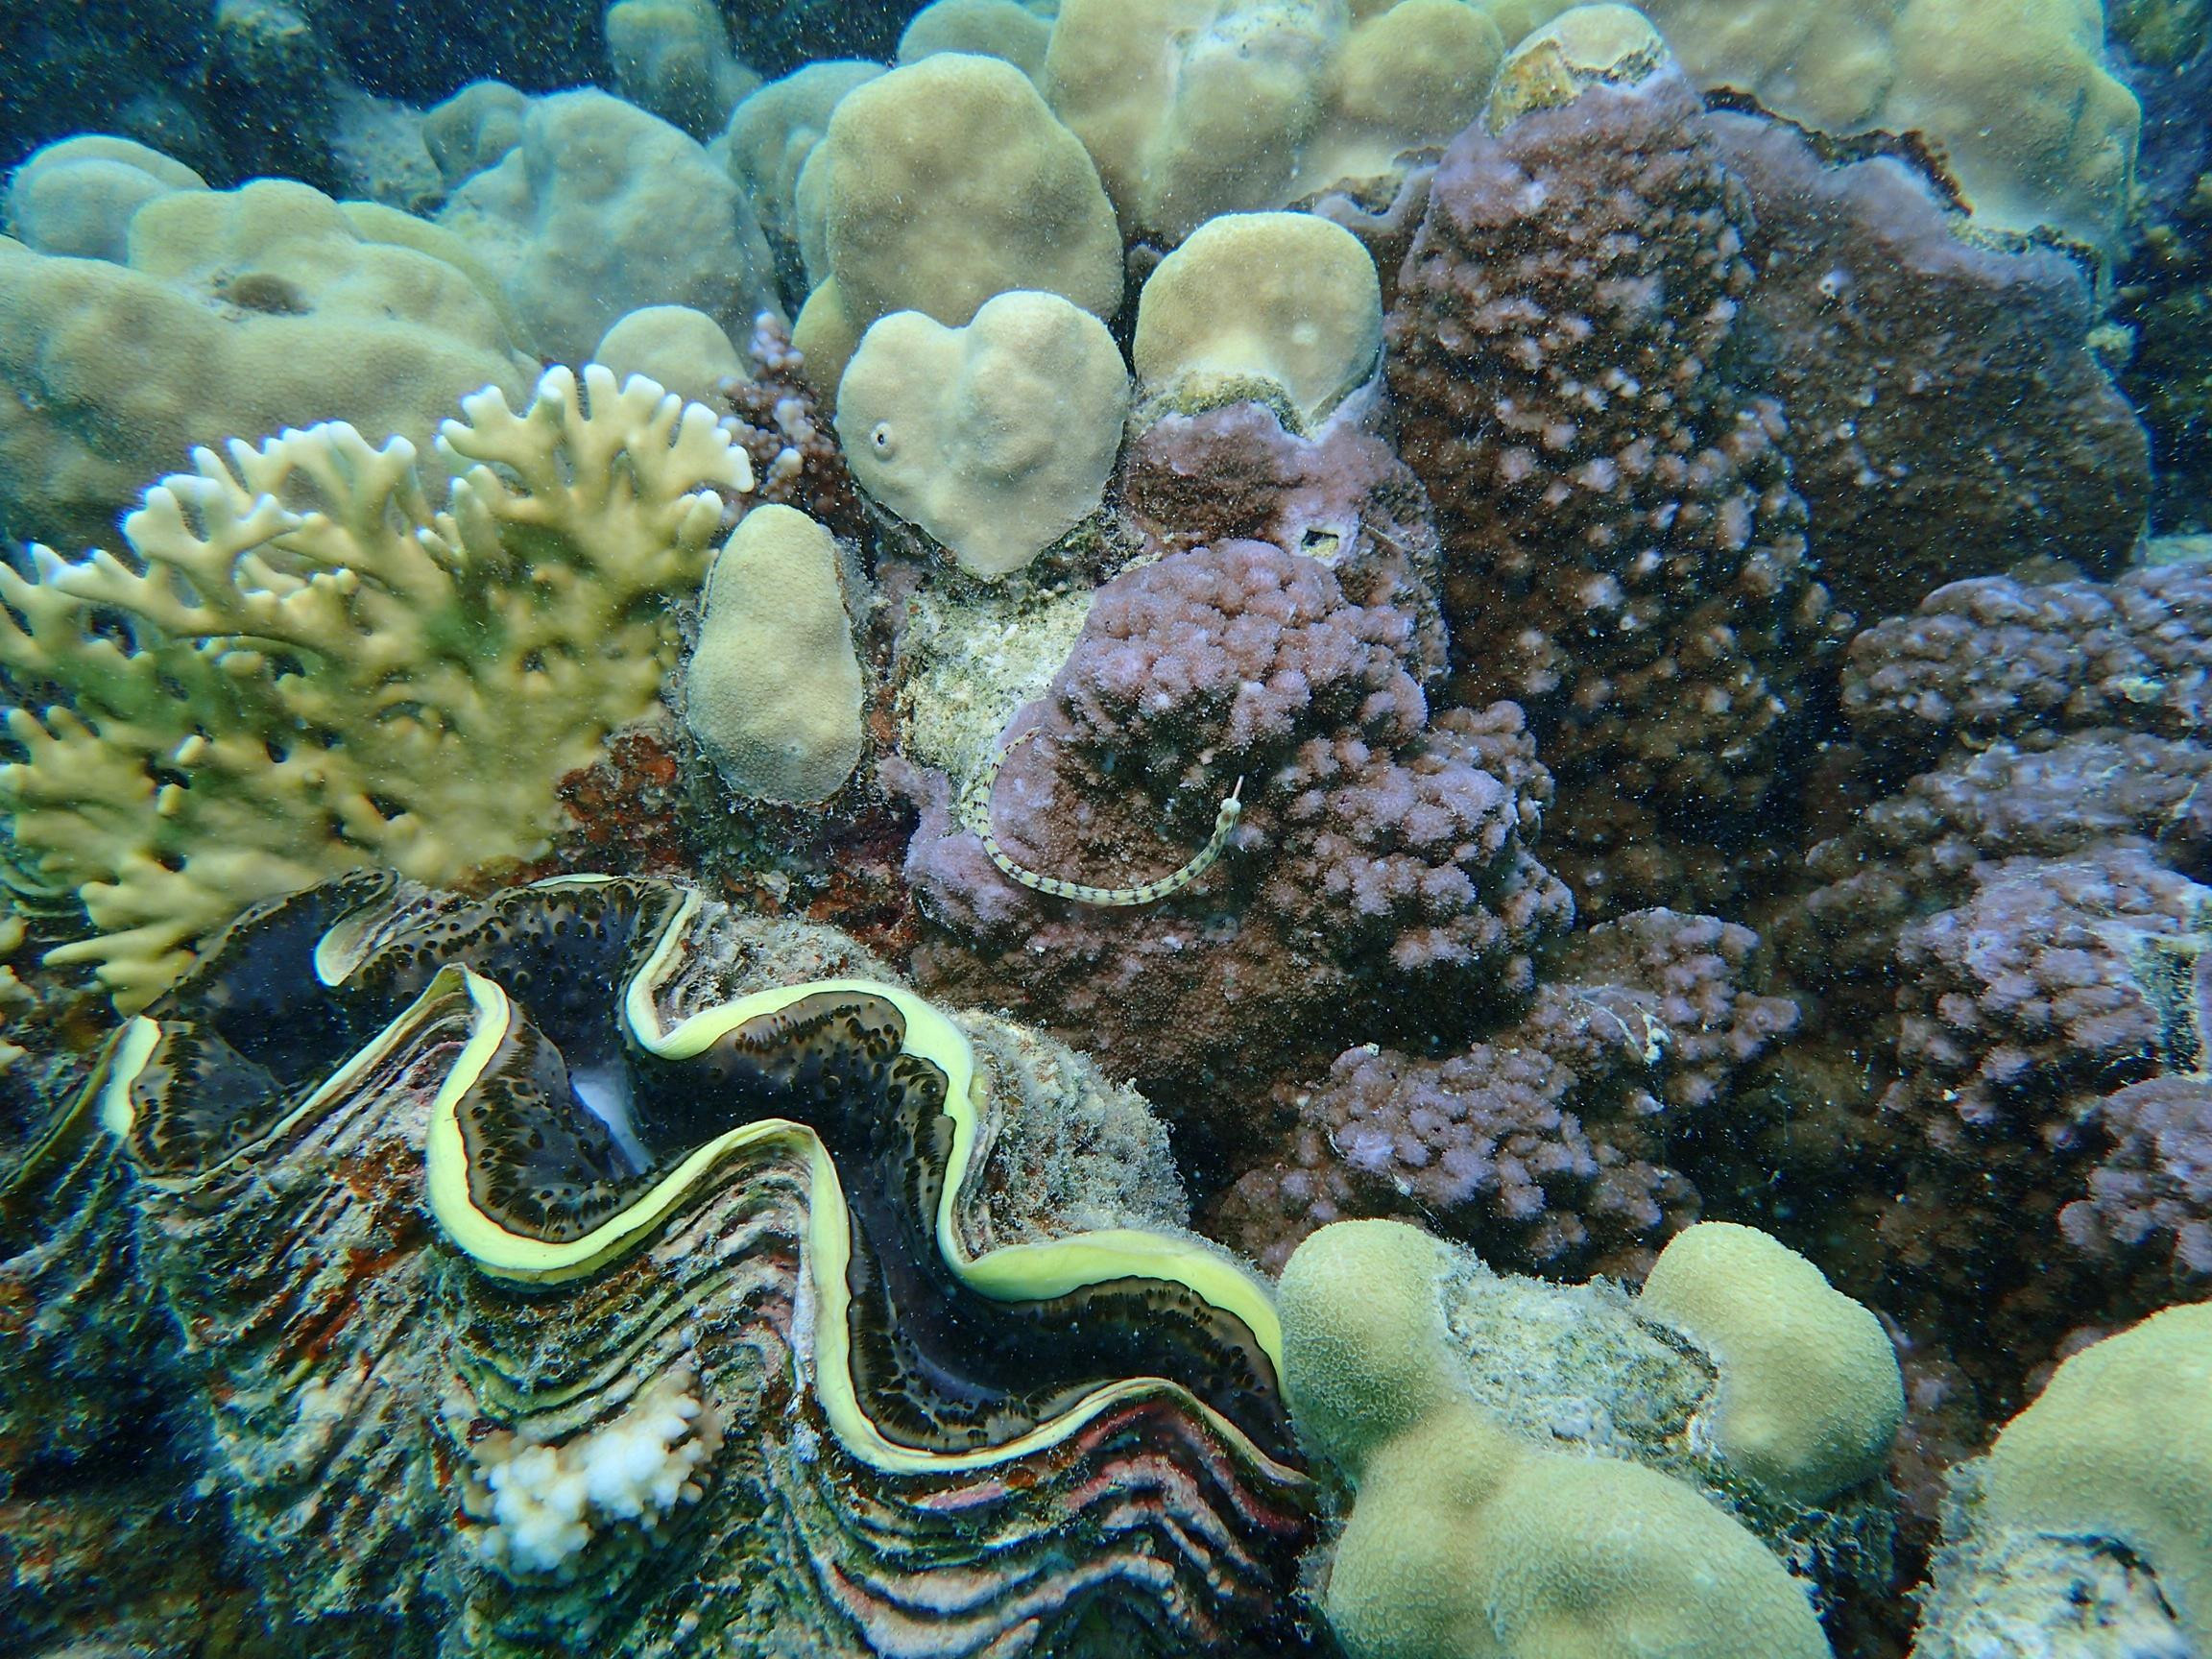 A giant clam and a pipefish (centre), close relative of the seahorse